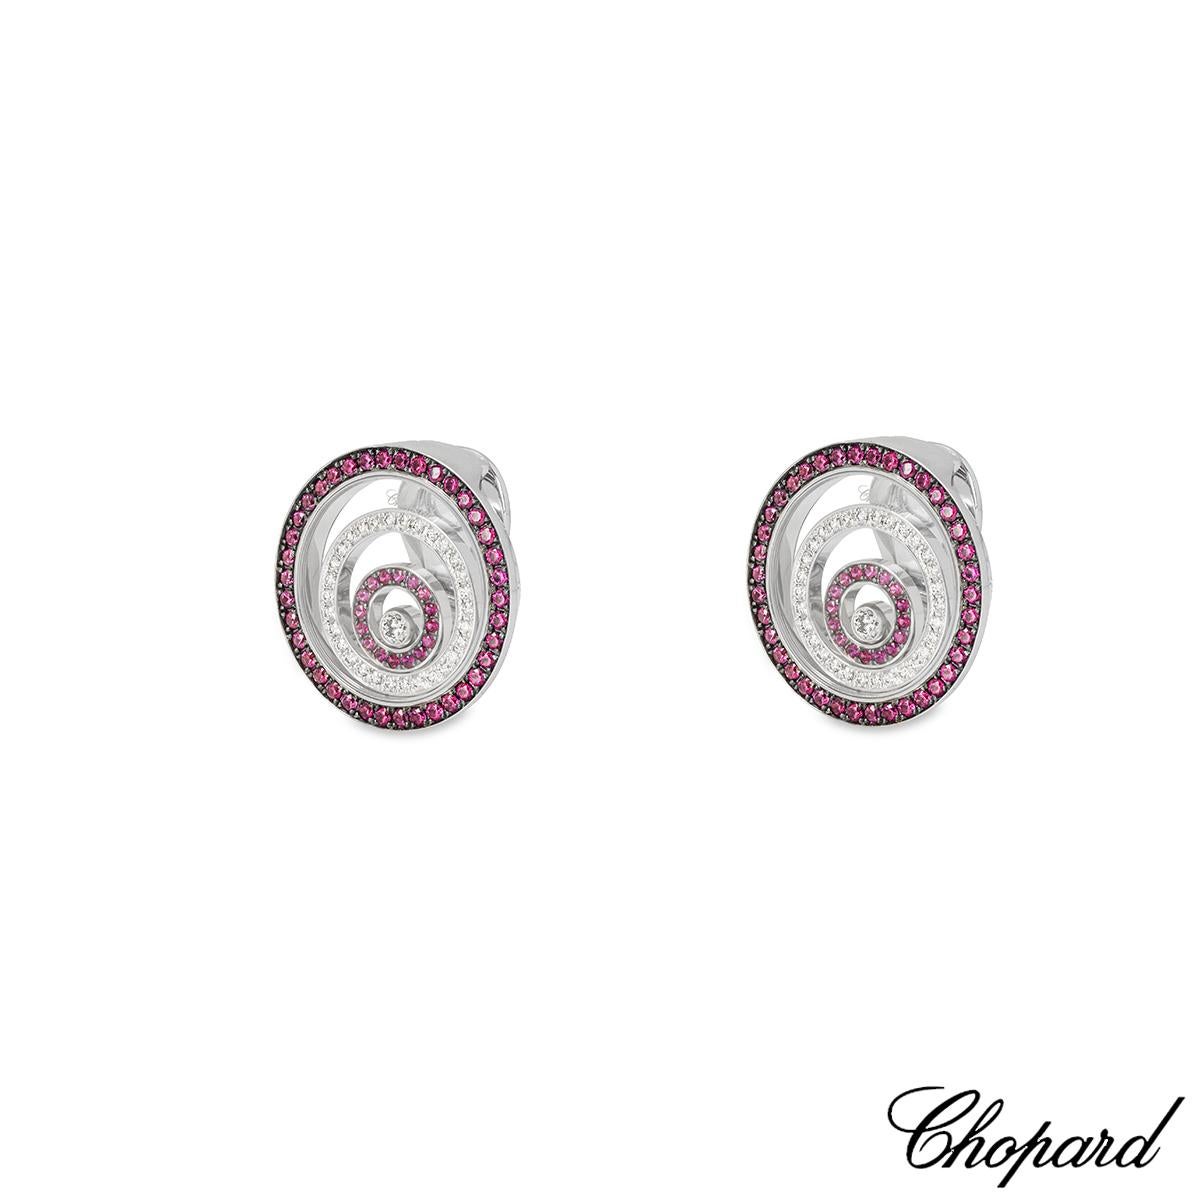 An enchanting pair of 18k white gold ruby and diamond earrings by Chopard from the Happy Spirit collection. The earrings feature three graduating circular motifs set inside each other. The outer and inner circles are pave set with 54 round cut